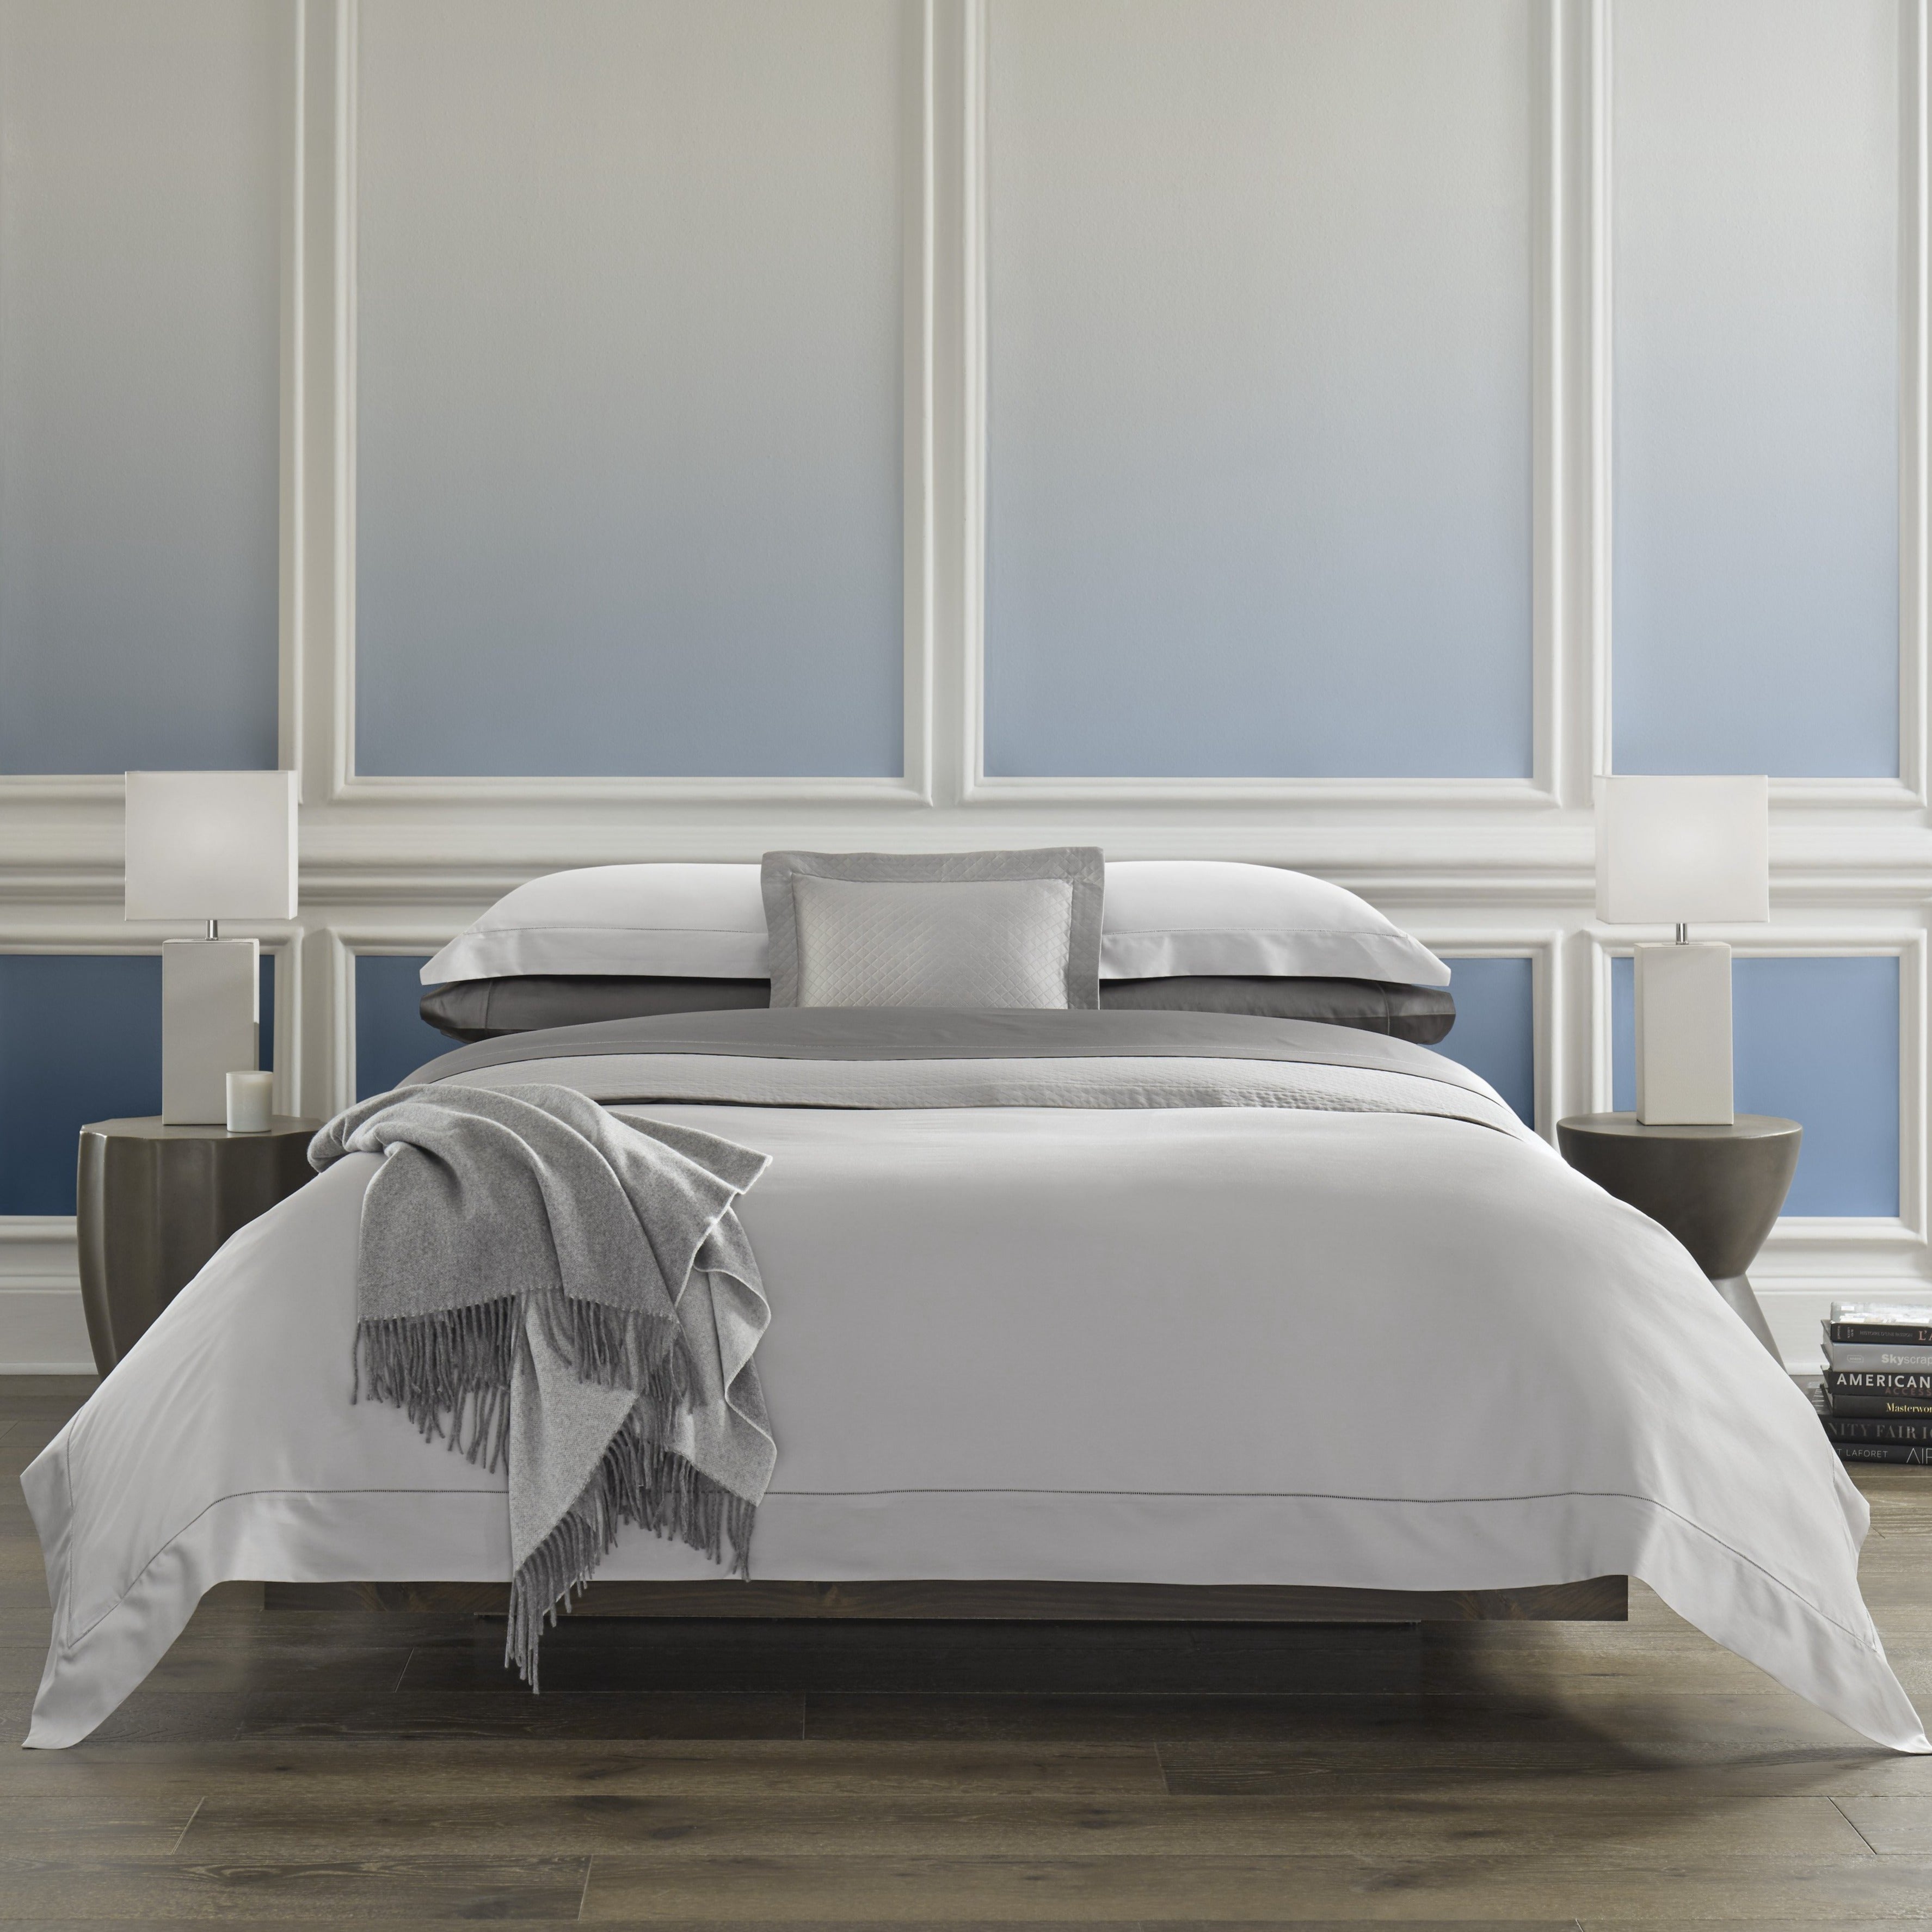 Giotto Bed Linens